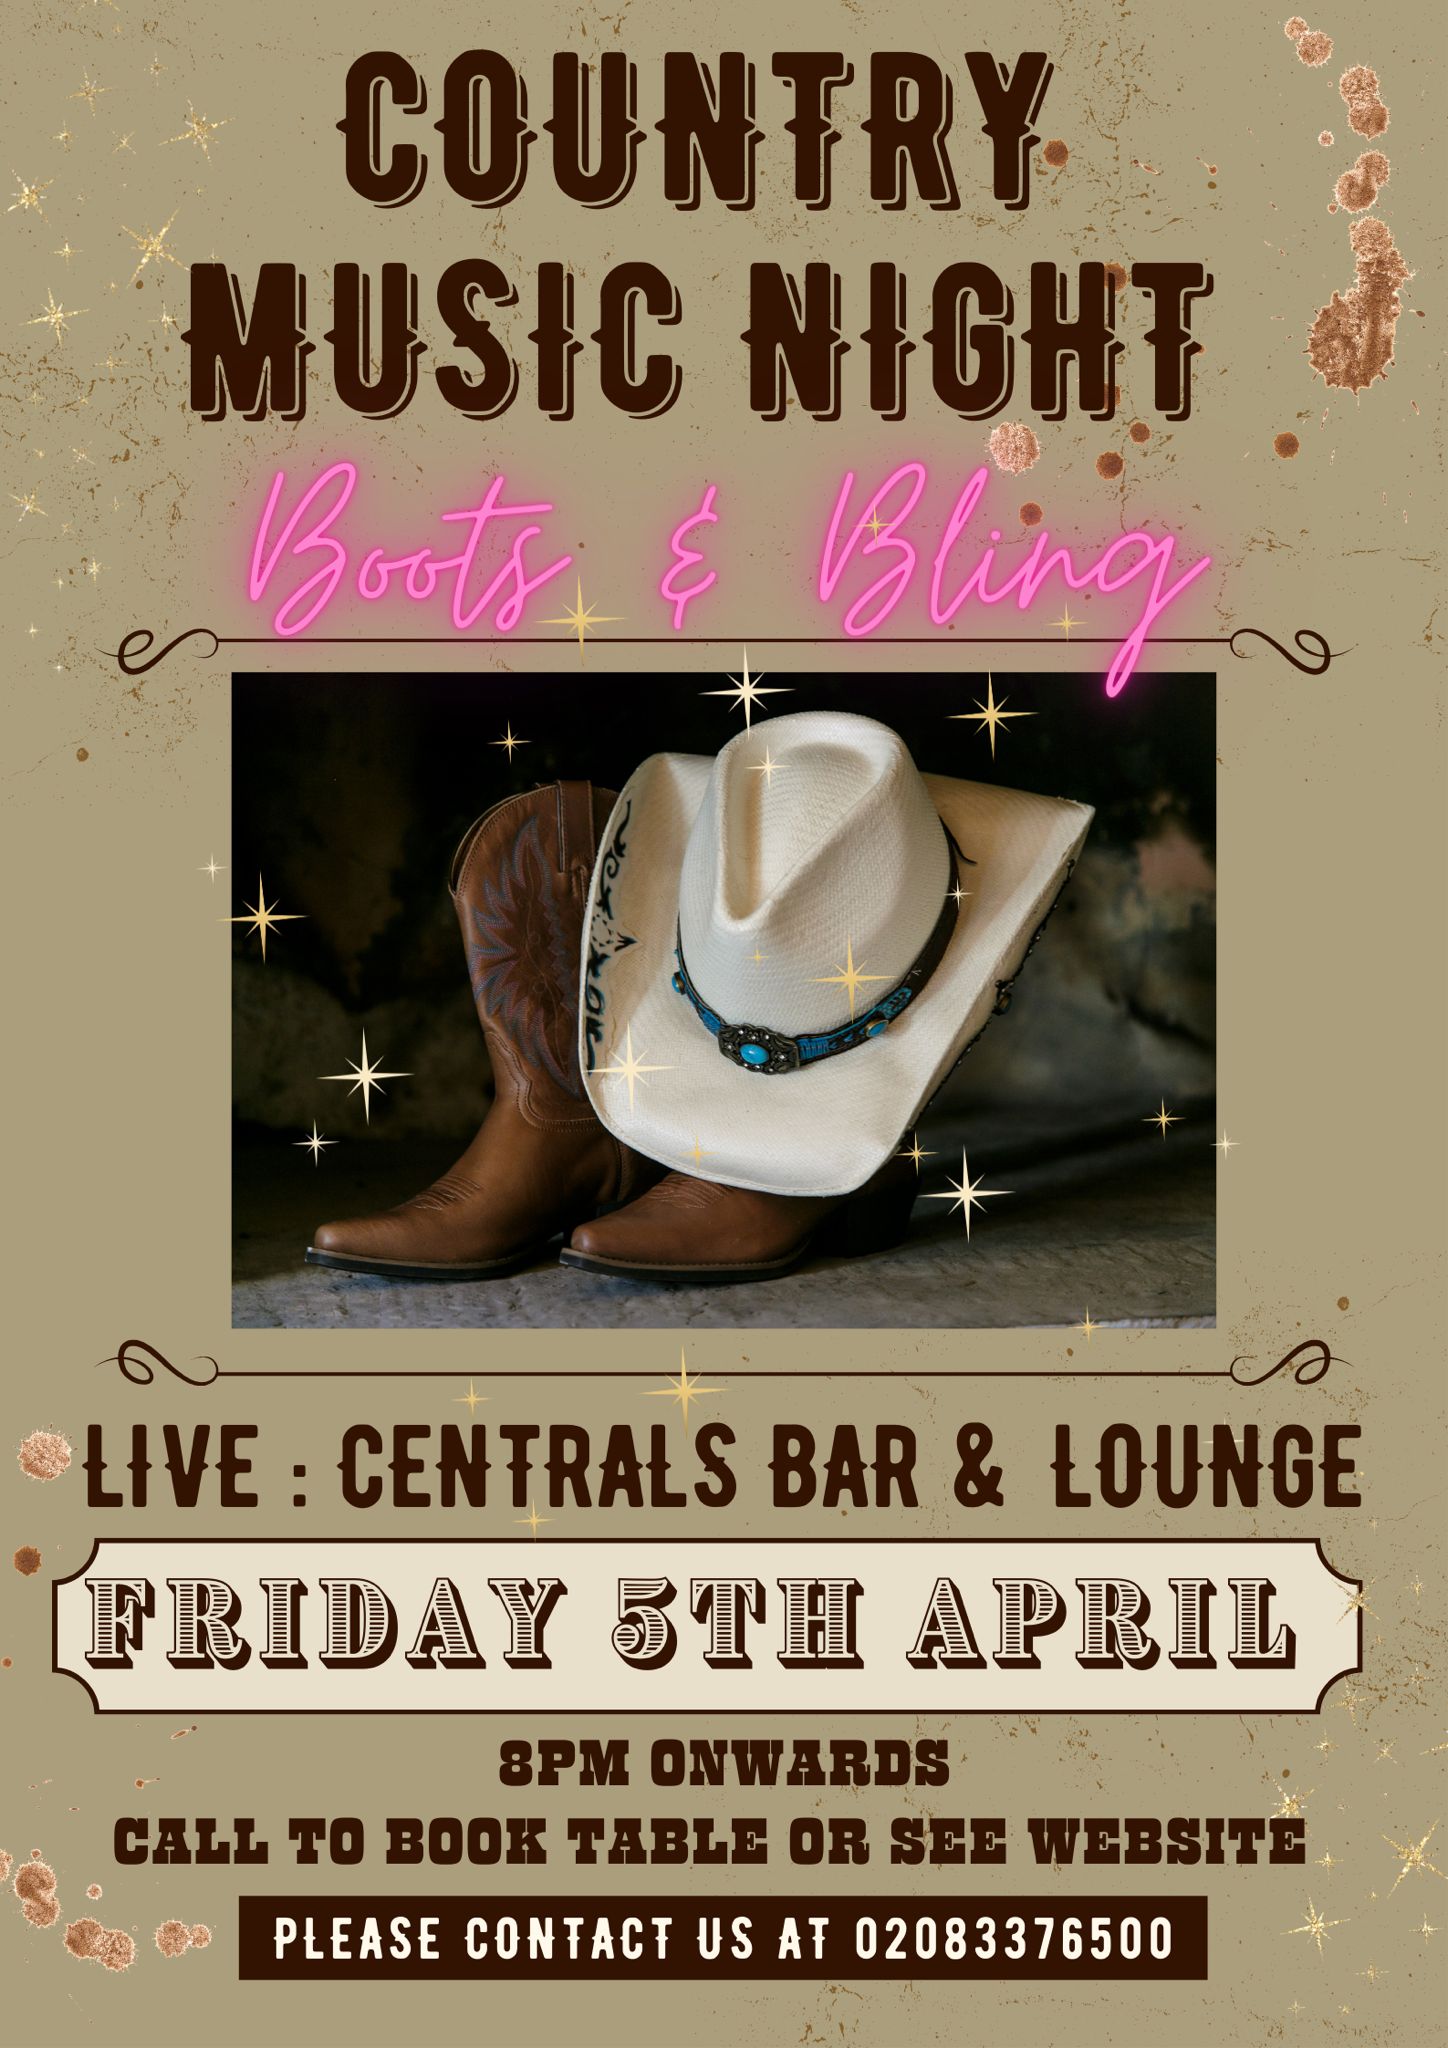 Boots & Bling - Friday 5th April